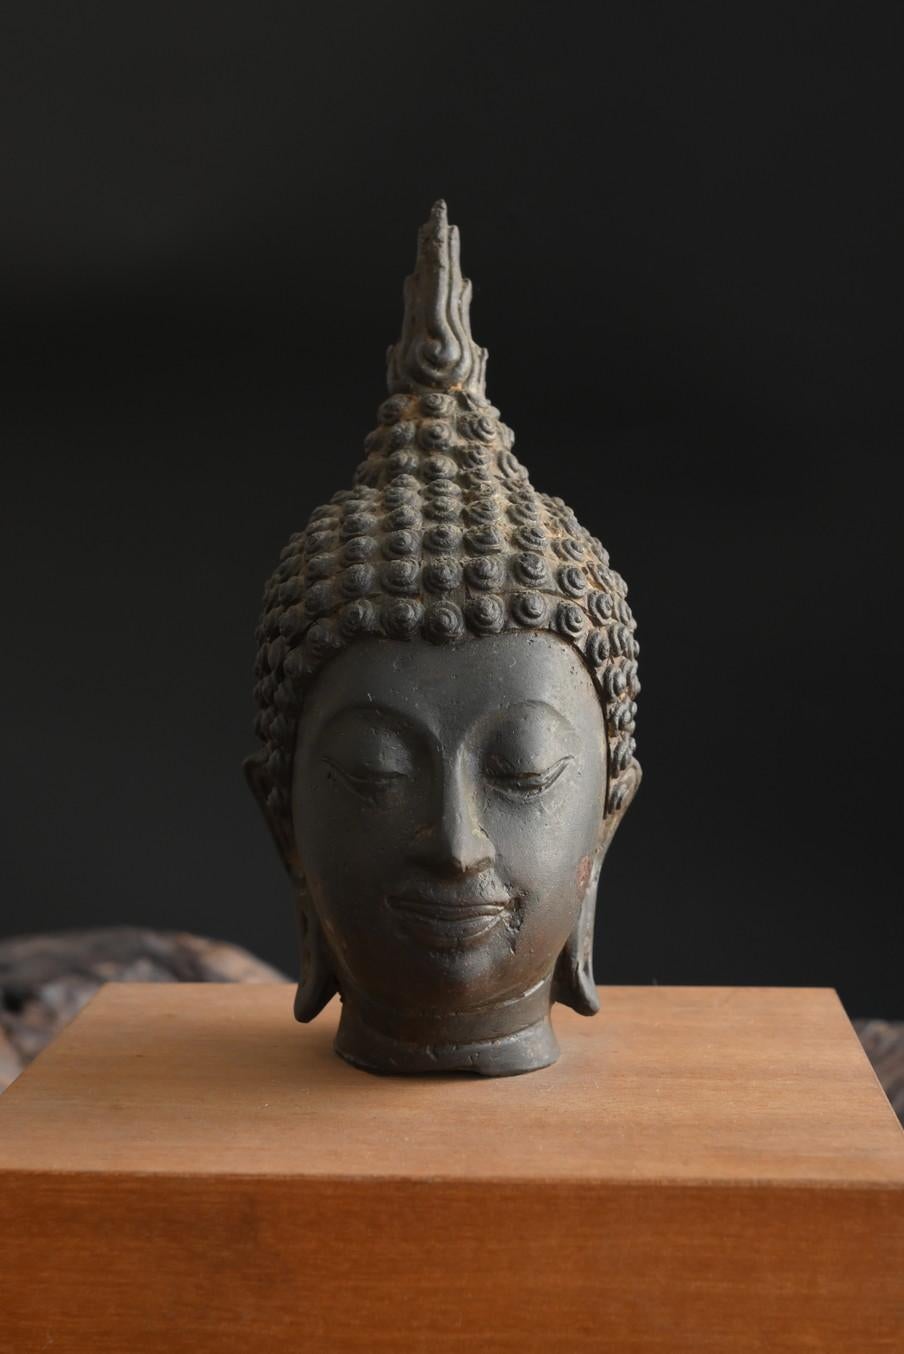 This is the head of a bronze or brass Buddha statue made in ancient times in Thailand.
It is thought that this Buddha statue was made from approximately the Sukhothai period to the Ayutthaya period.
It has an egg-shaped head, arched eyebrows,